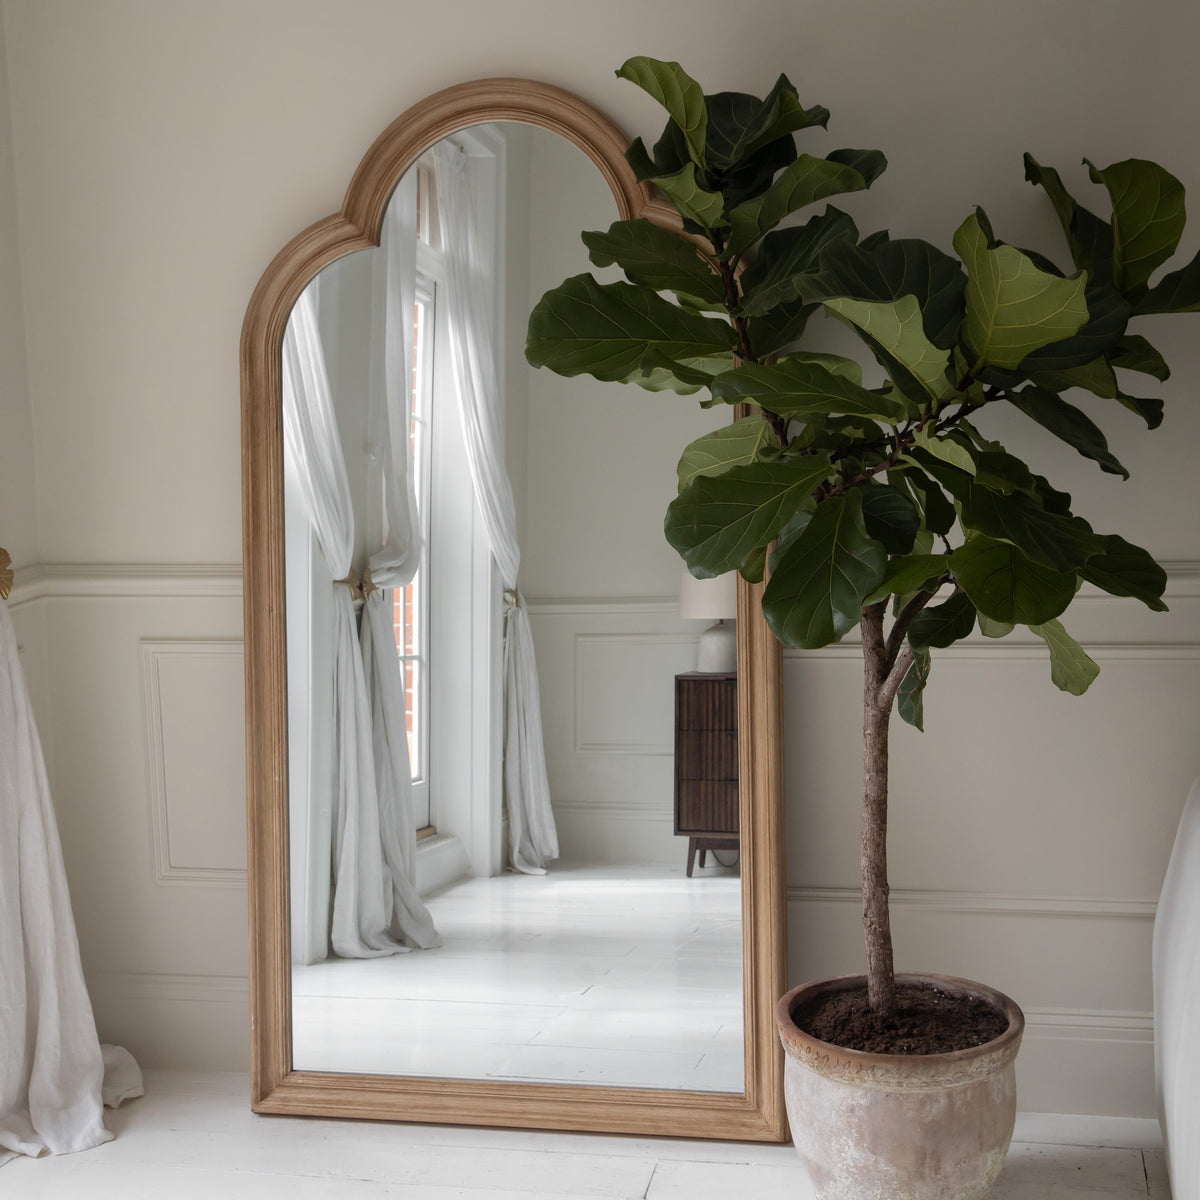 Washed Wood Arched Full Length Mirror beside plant pot